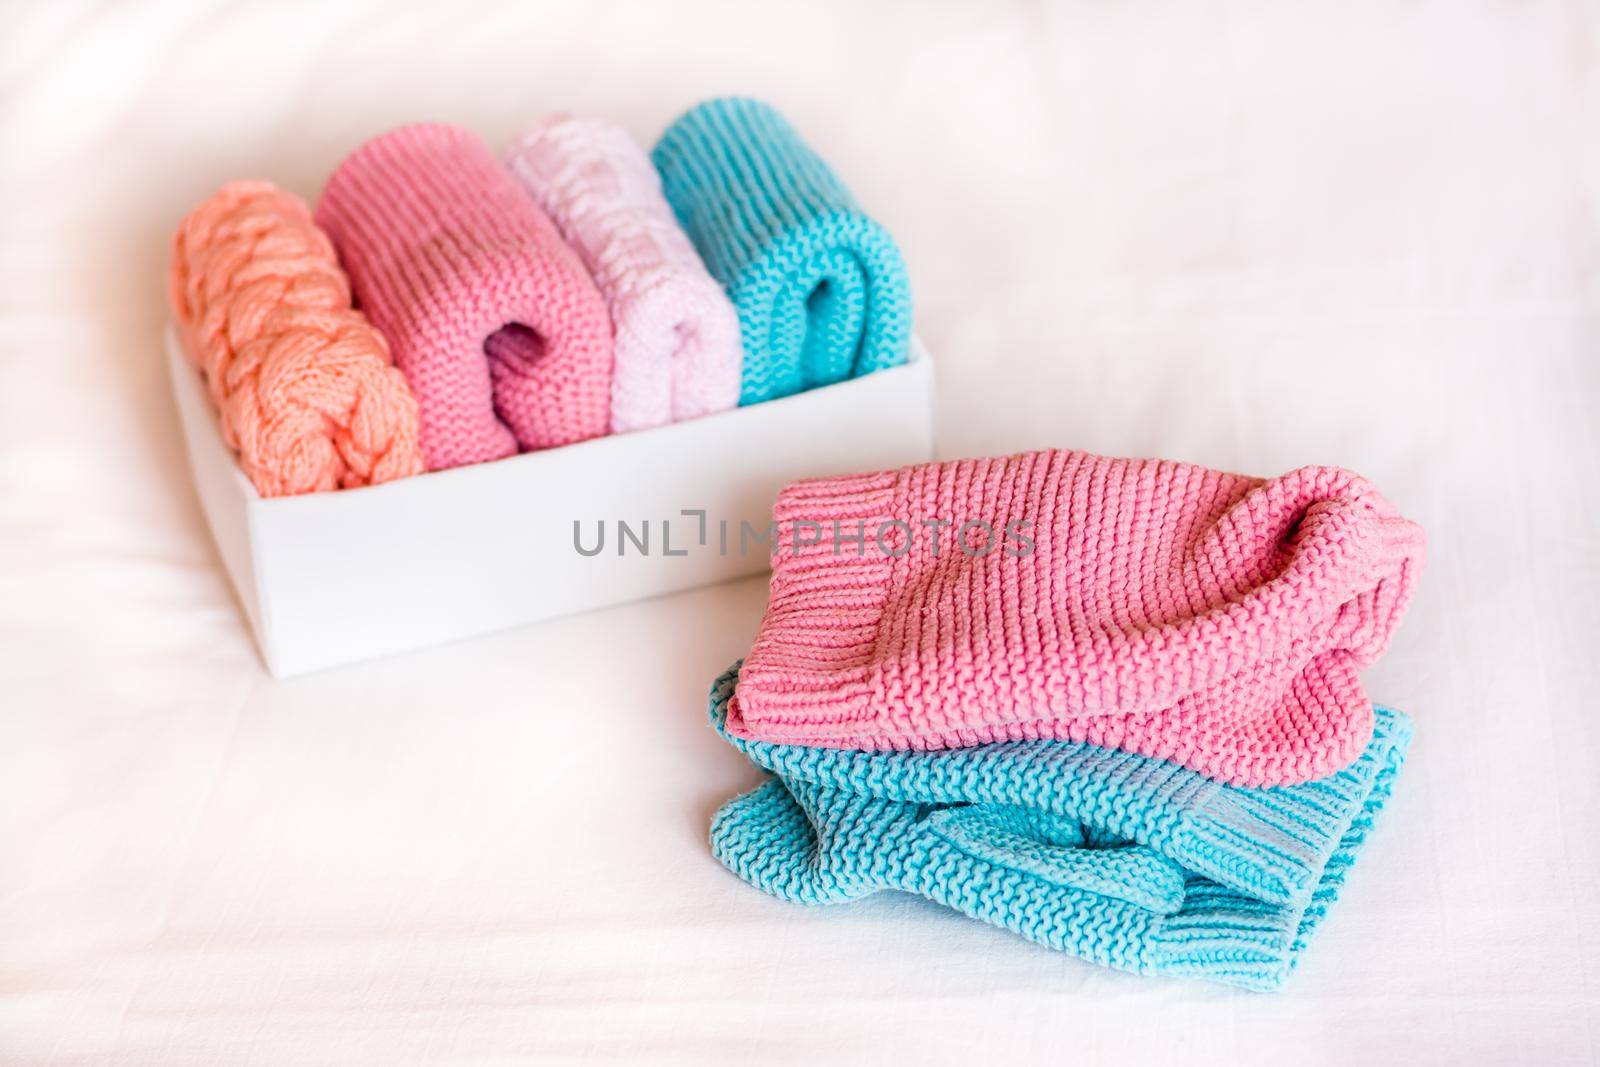 Organization and order. Knitted clothes lie next to a box of neatly folded things. by Aleruana